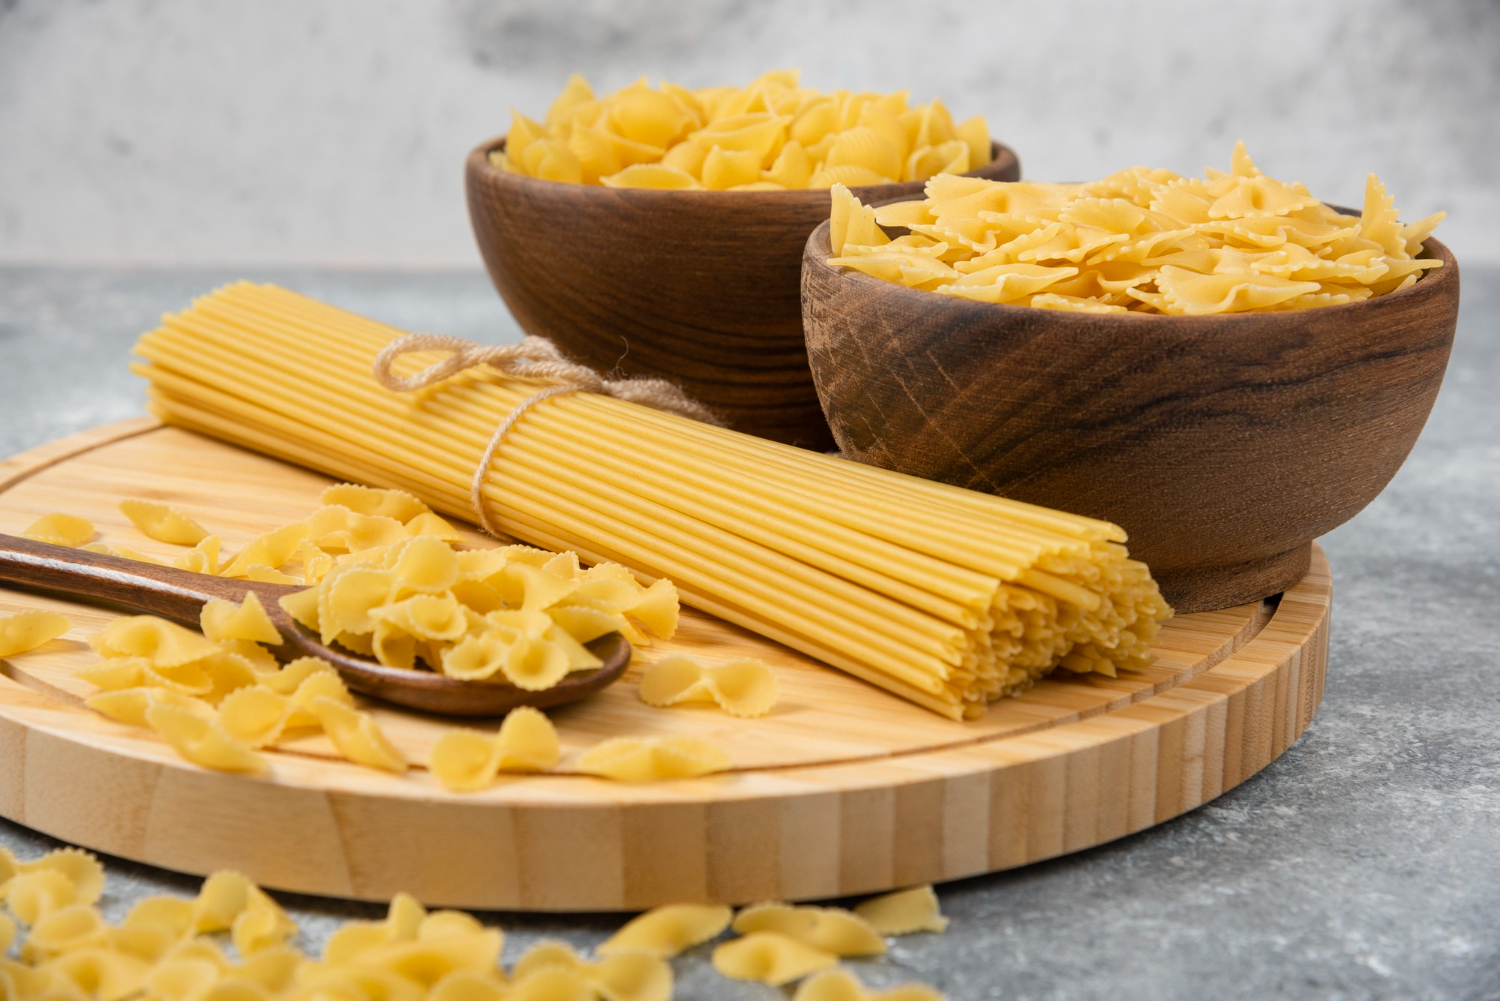 Discover essential tips and tricks of Oven Baking Pasta to achieve the perfect balance of flavors and textures in your baked pasta dishes.